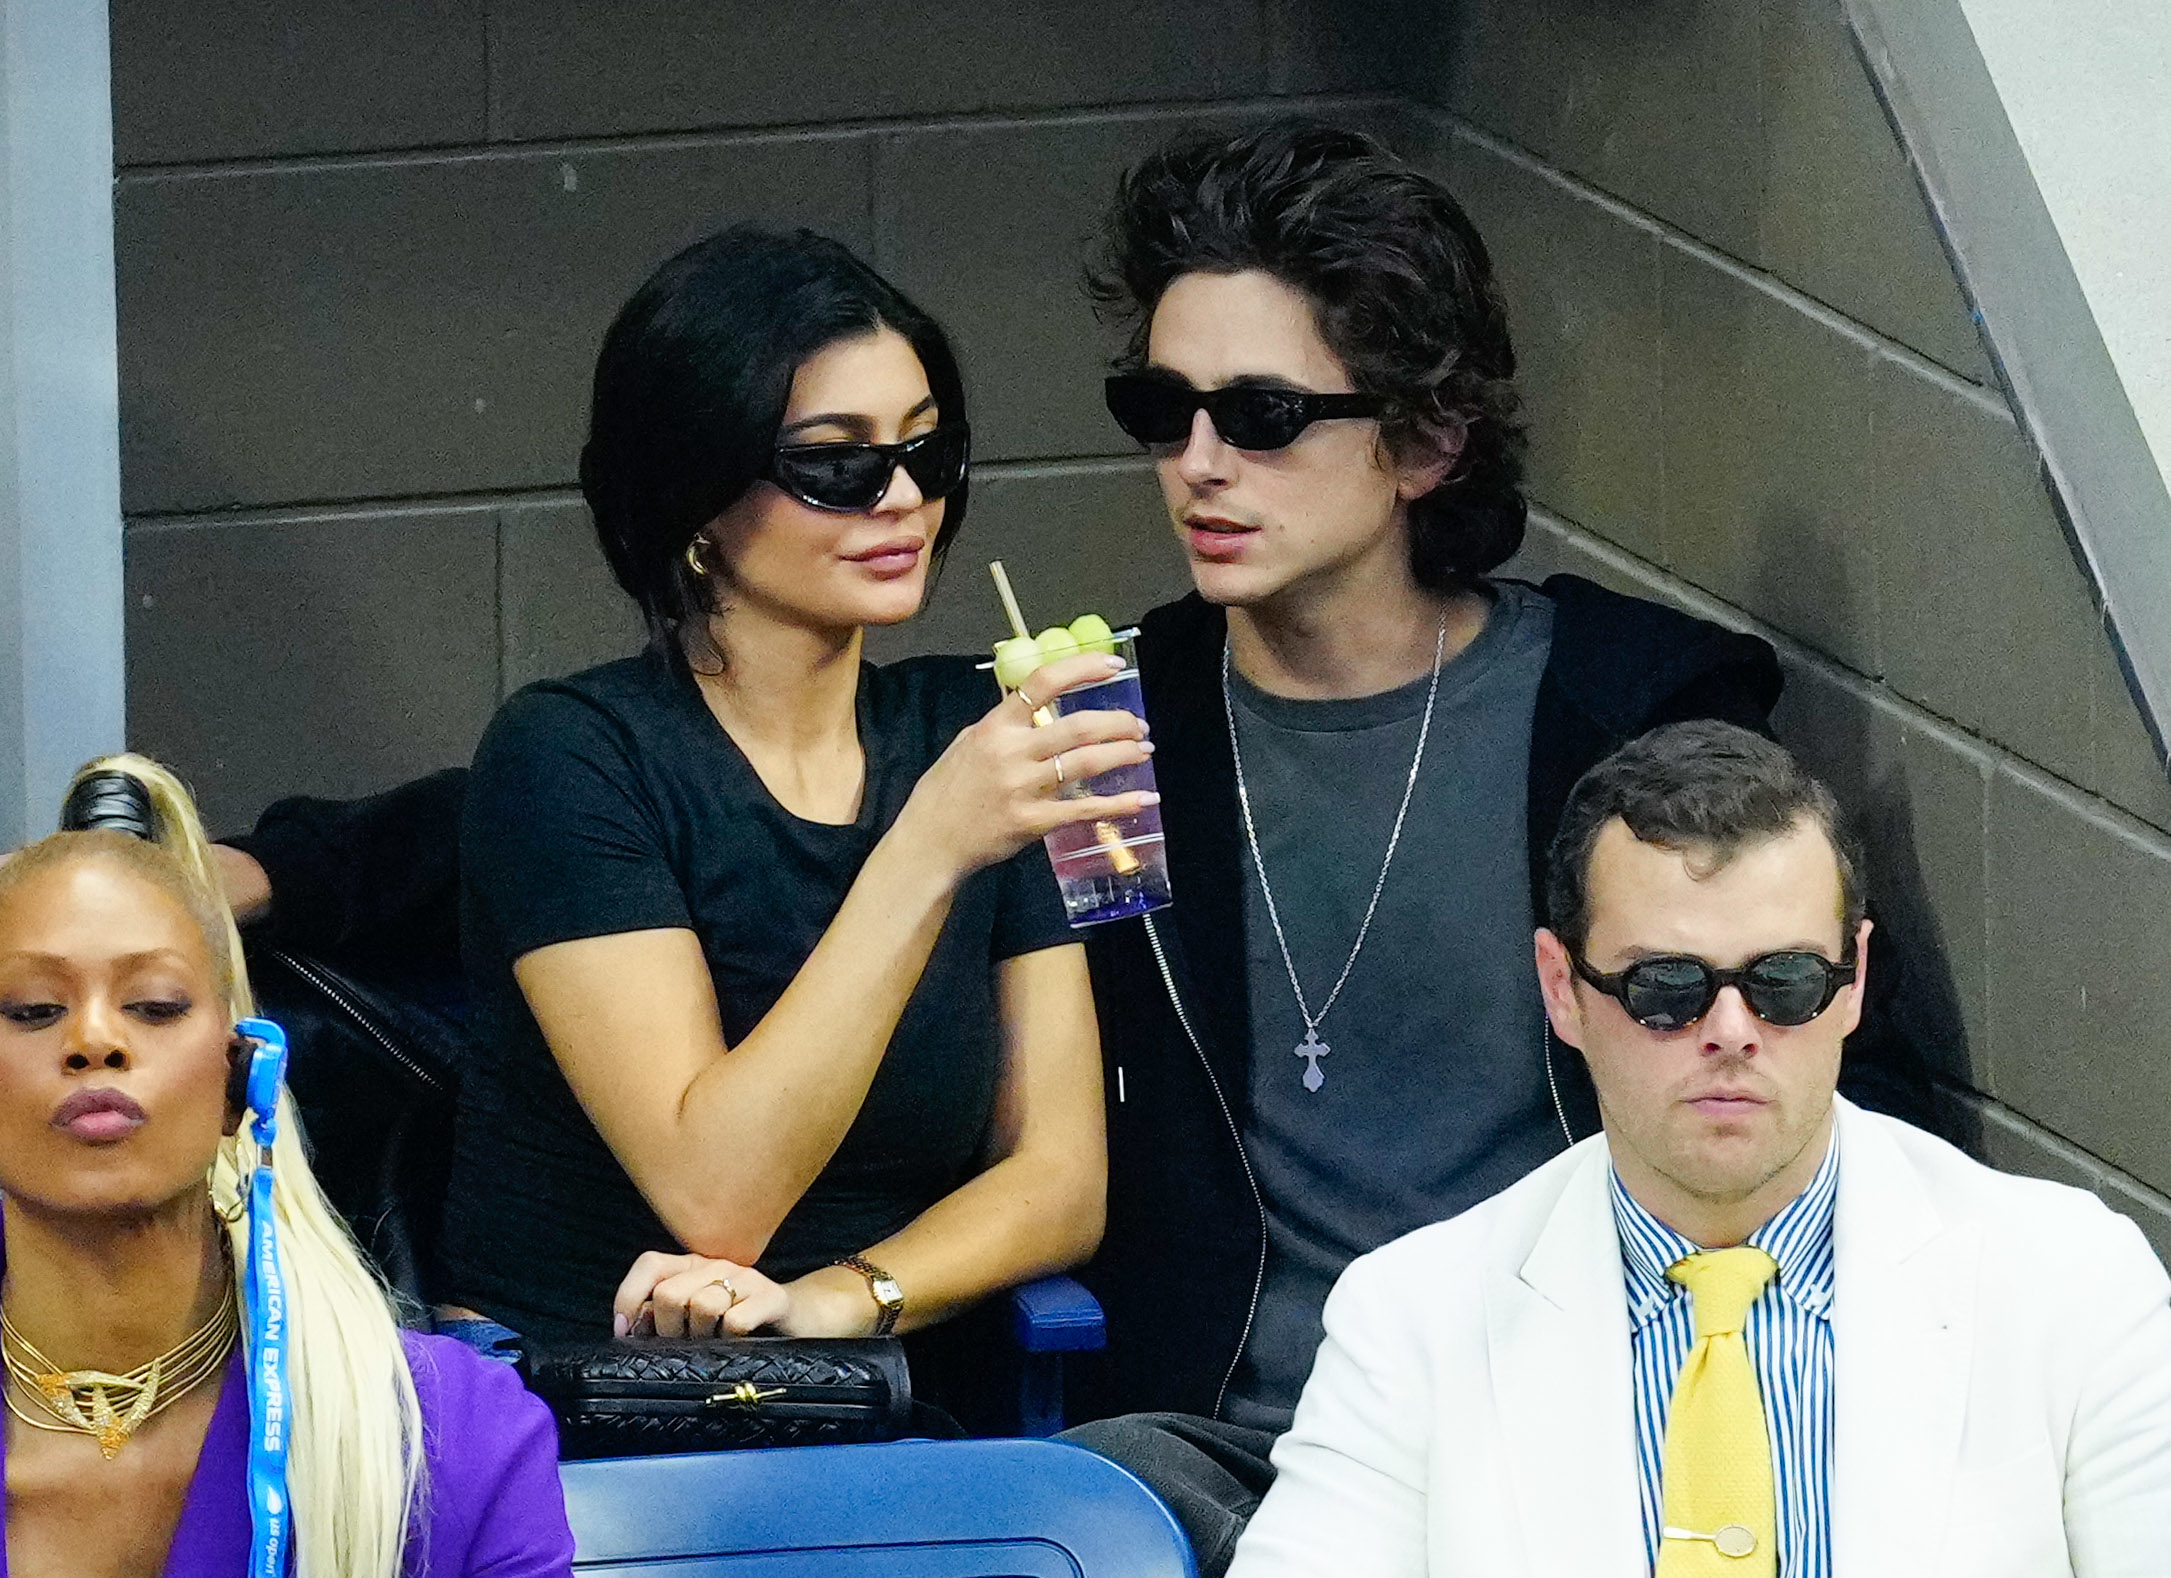 Kylie Jenner and Timothée Chalamet seated side by side at an event